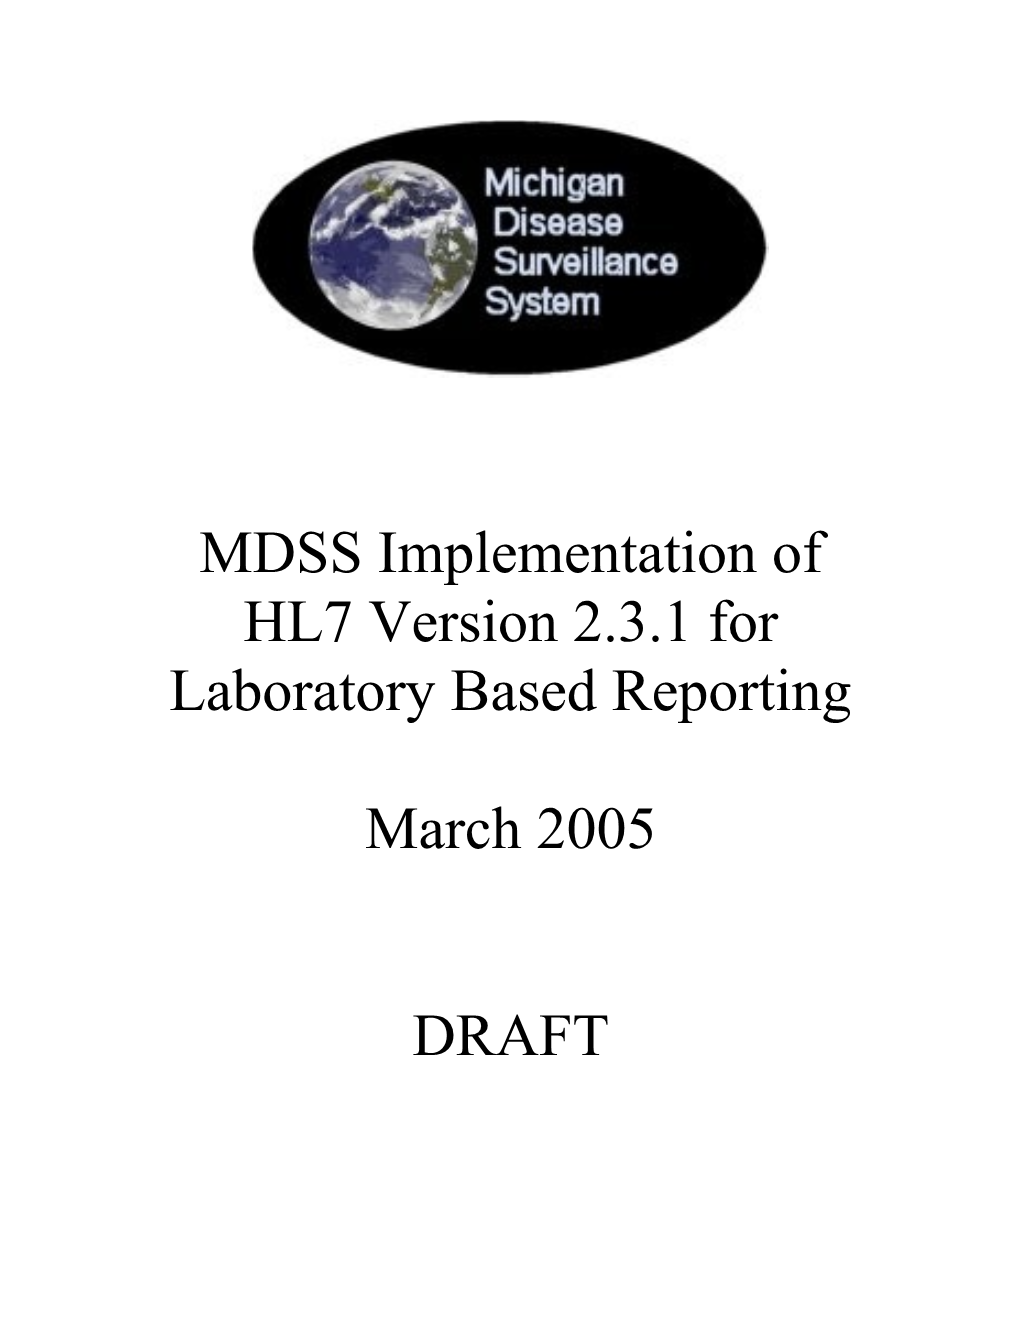 The Michigan Disease Surveillance System (MDSS) Will Accept Electronic Laboratory Reporting